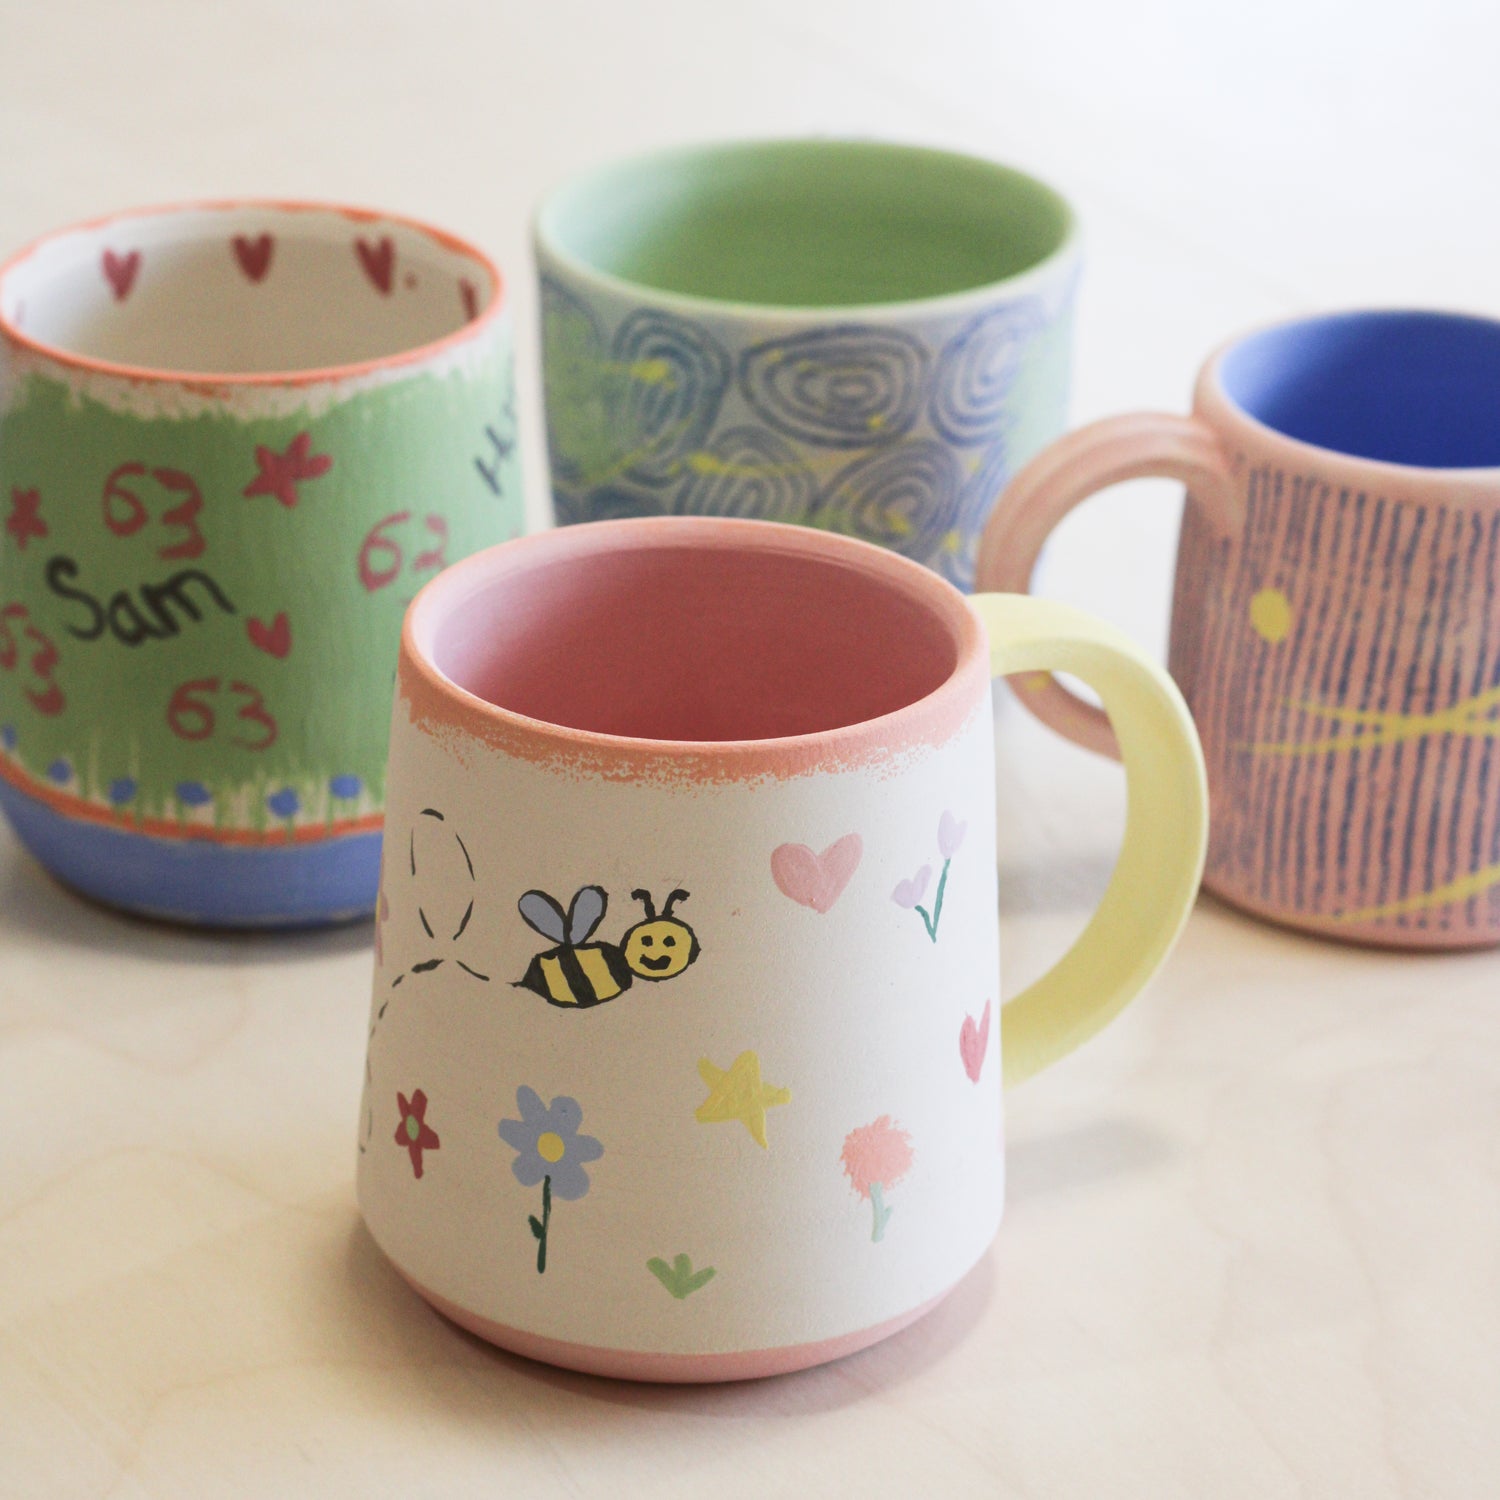 Pottery painting - decorate handmade pottery!